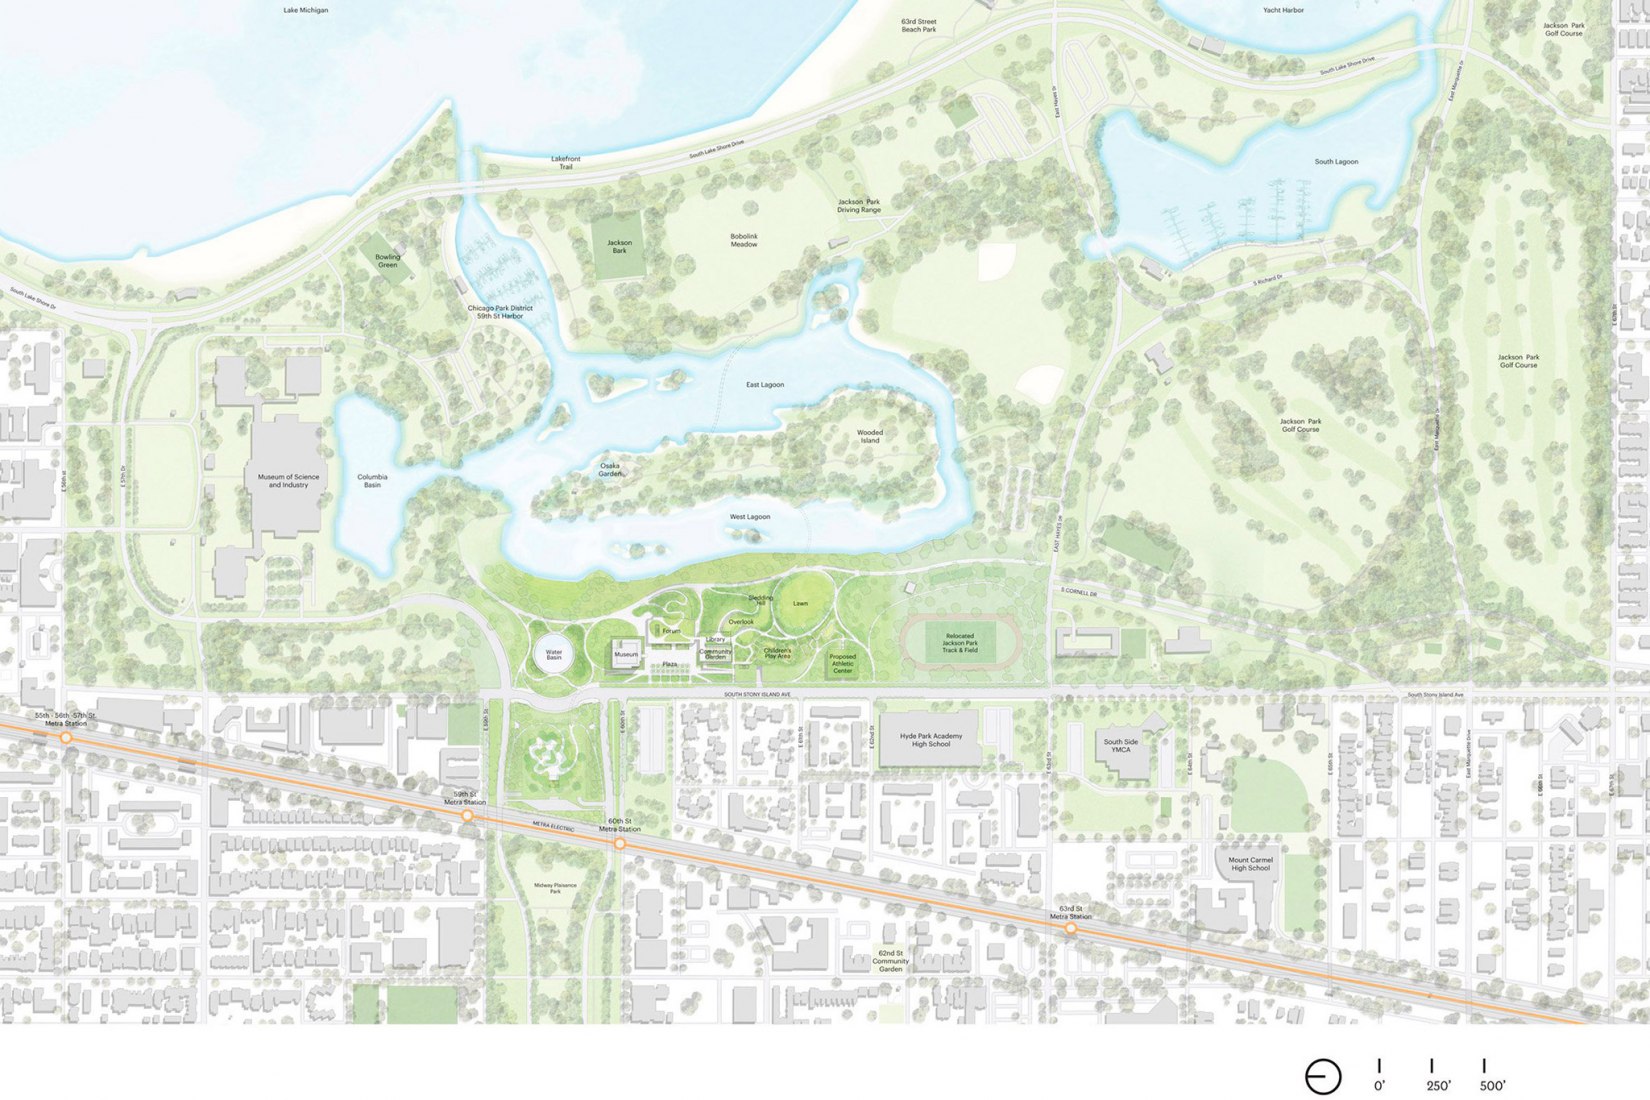 Site plan. Obama Presidential Center by Tod Williams and Billie Tsien. Image courtesy of the Obama Foundation.